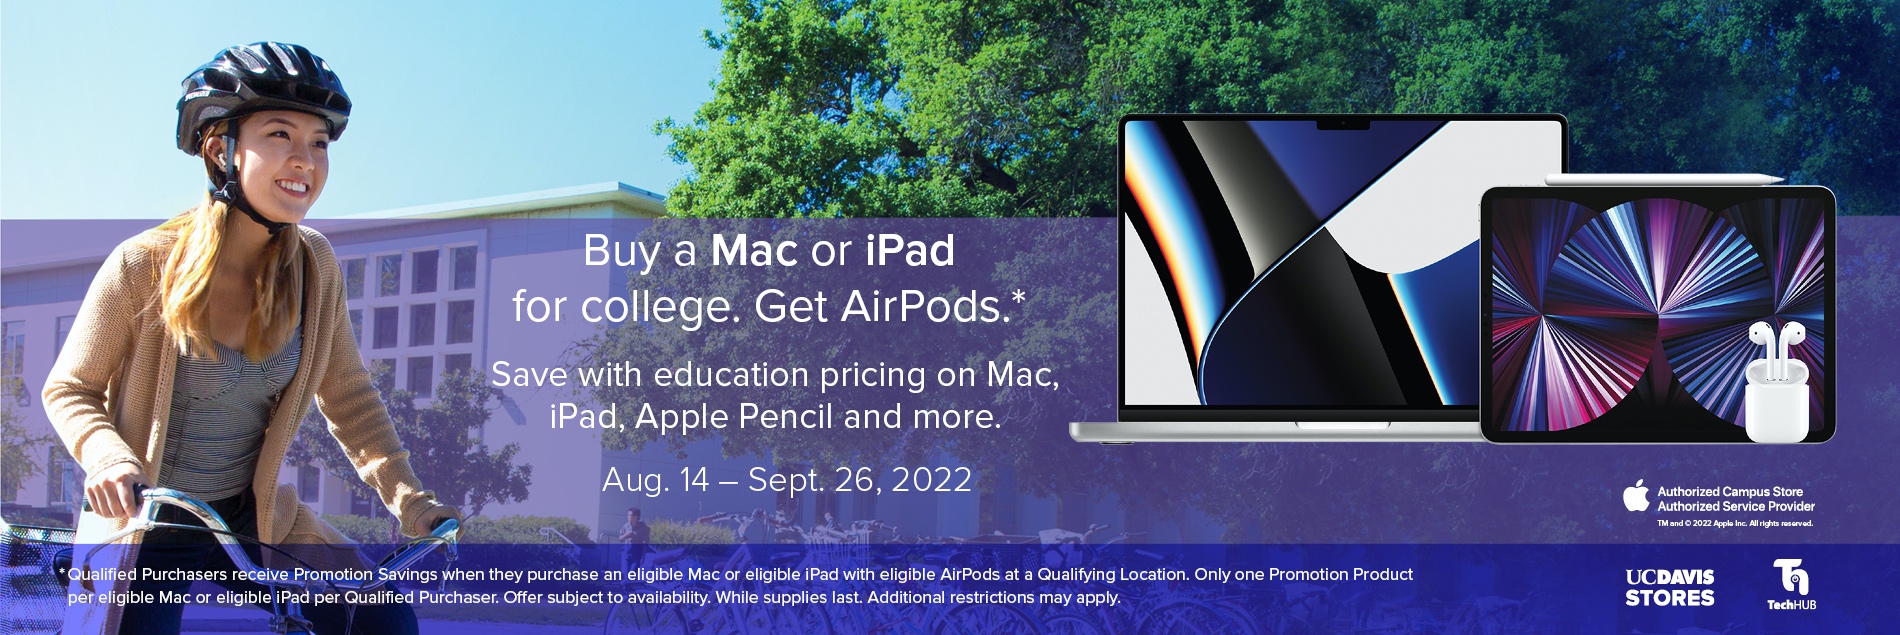 But a Mac or iPad for college. Get AirPods.